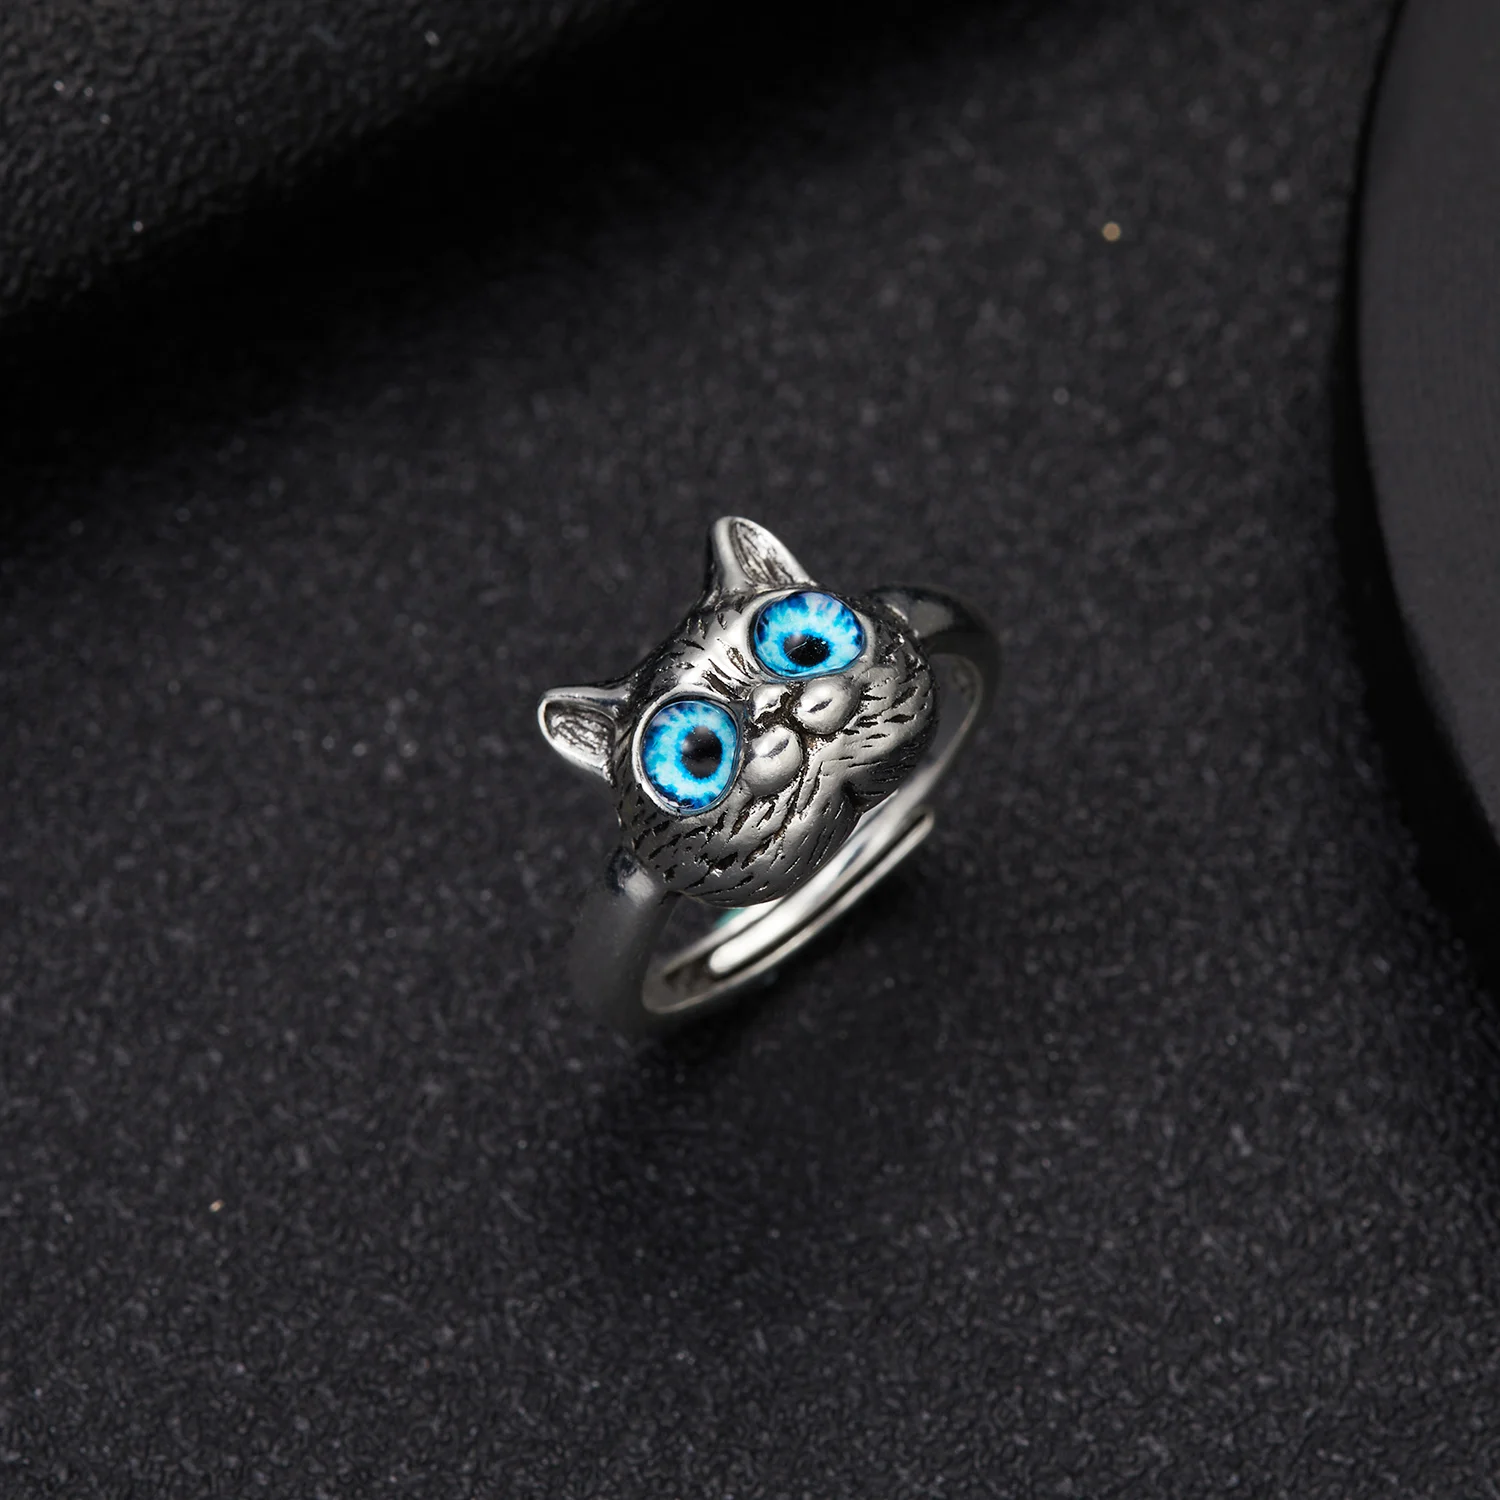 Cute Fortune Cat Animal Rings Couple Jewelry Adjustable Finger Rings For Men Lover Women Lady Girl Boy Male Valentine's Day Gift